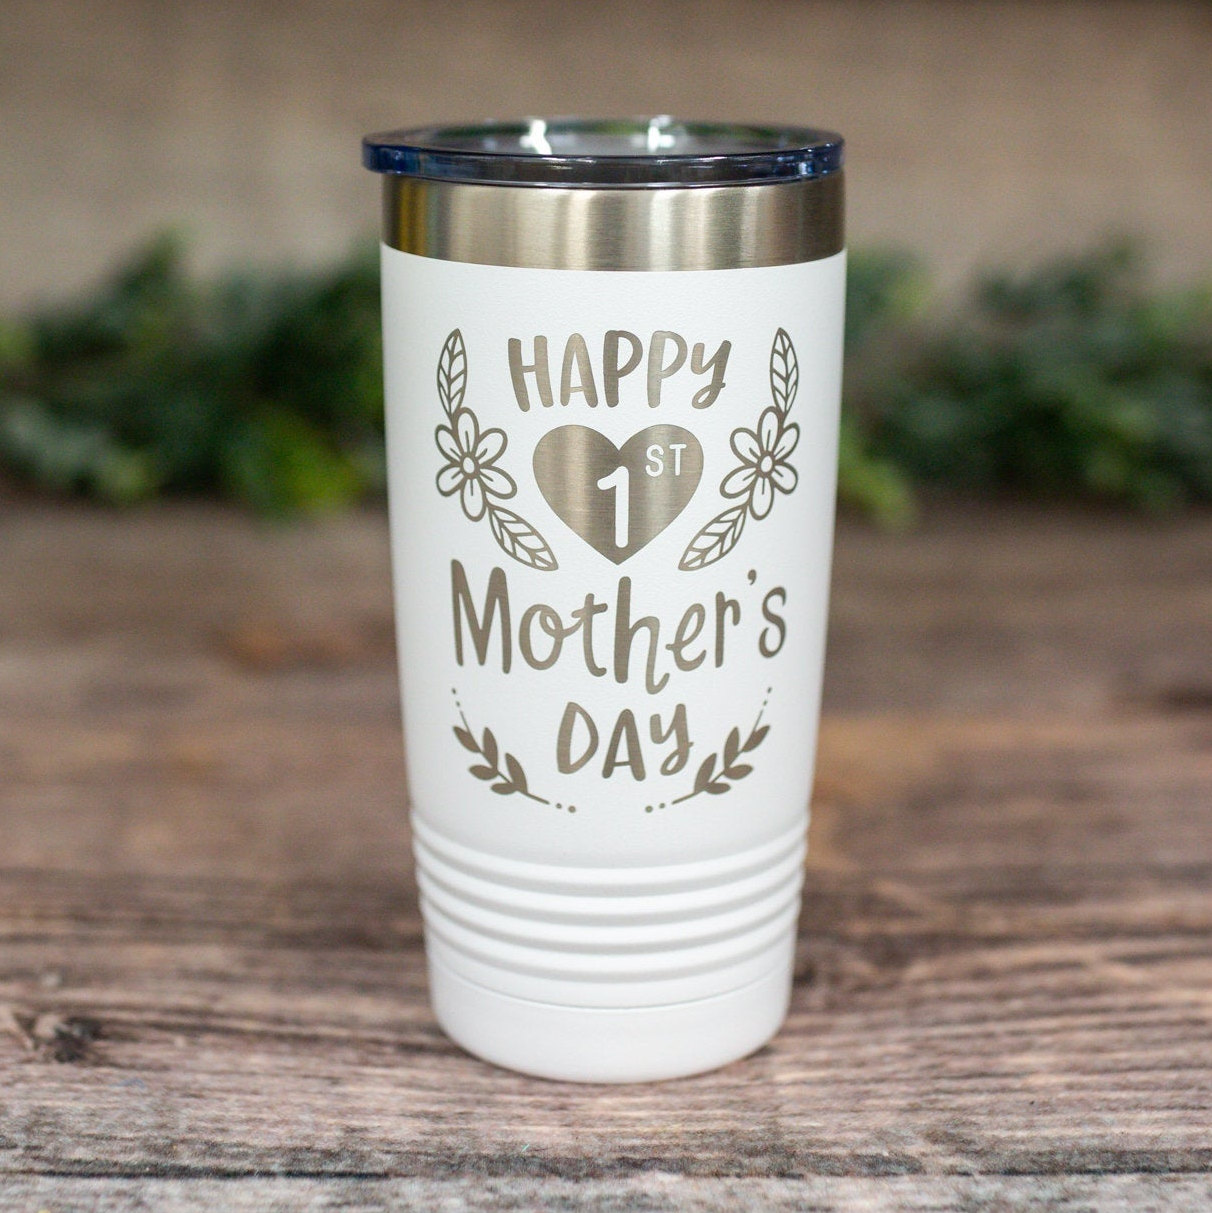 https://3cetching.com/wp-content/uploads/2021/07/happy-first-mothers-day-engraved-personalized-mom-gift-mothers-day-gift-gift-for-mom-60f76f42.jpg